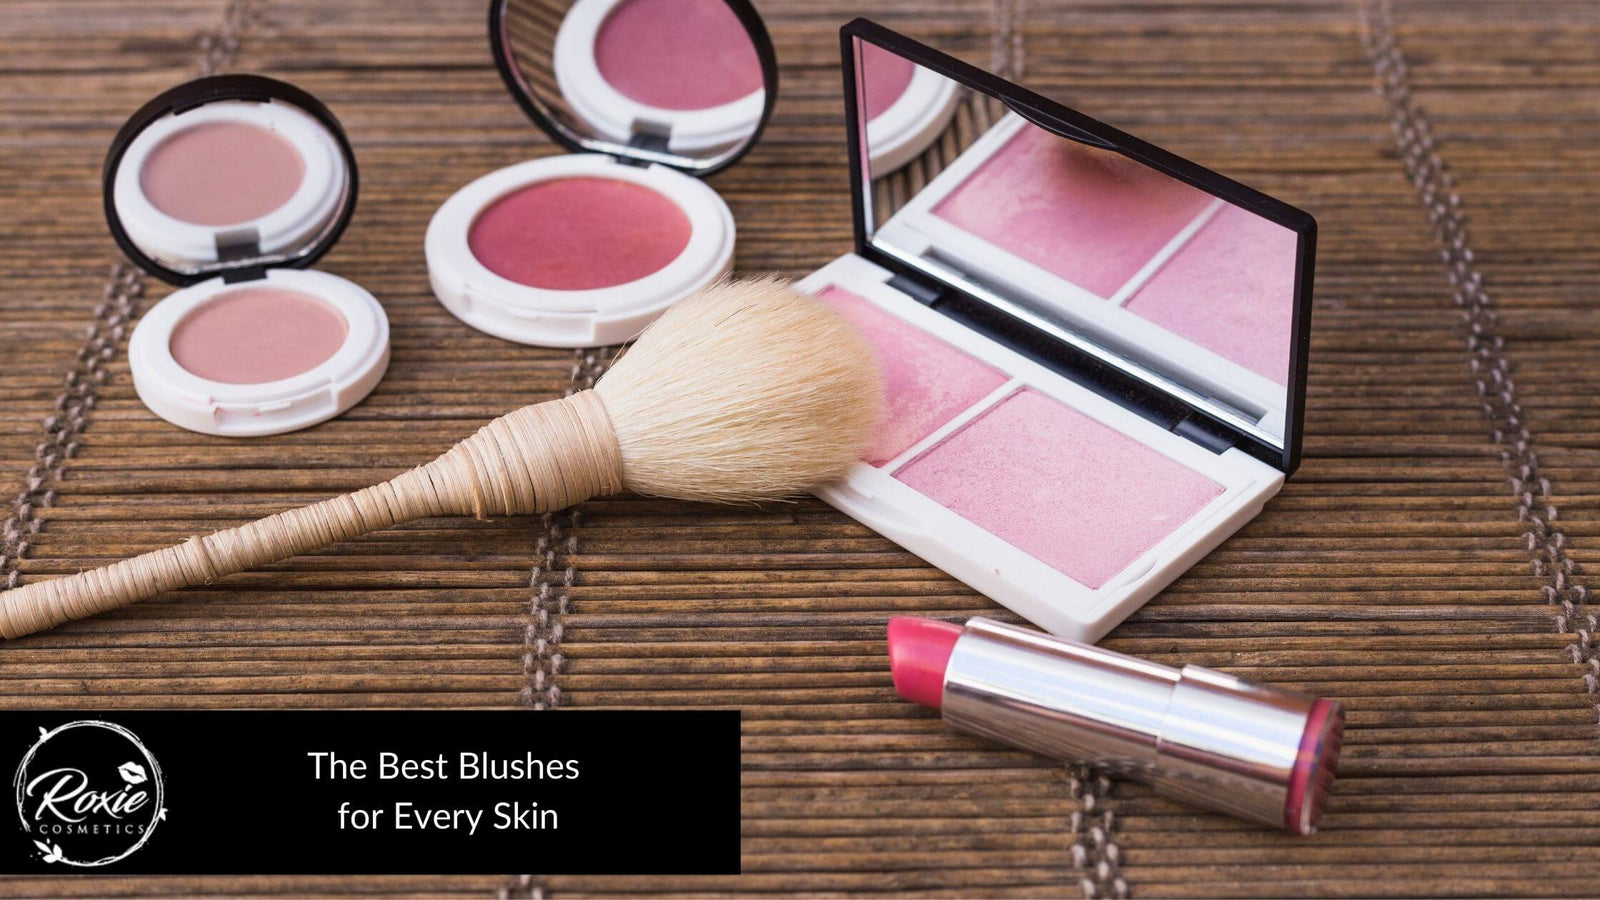 Blushes for Every Skin